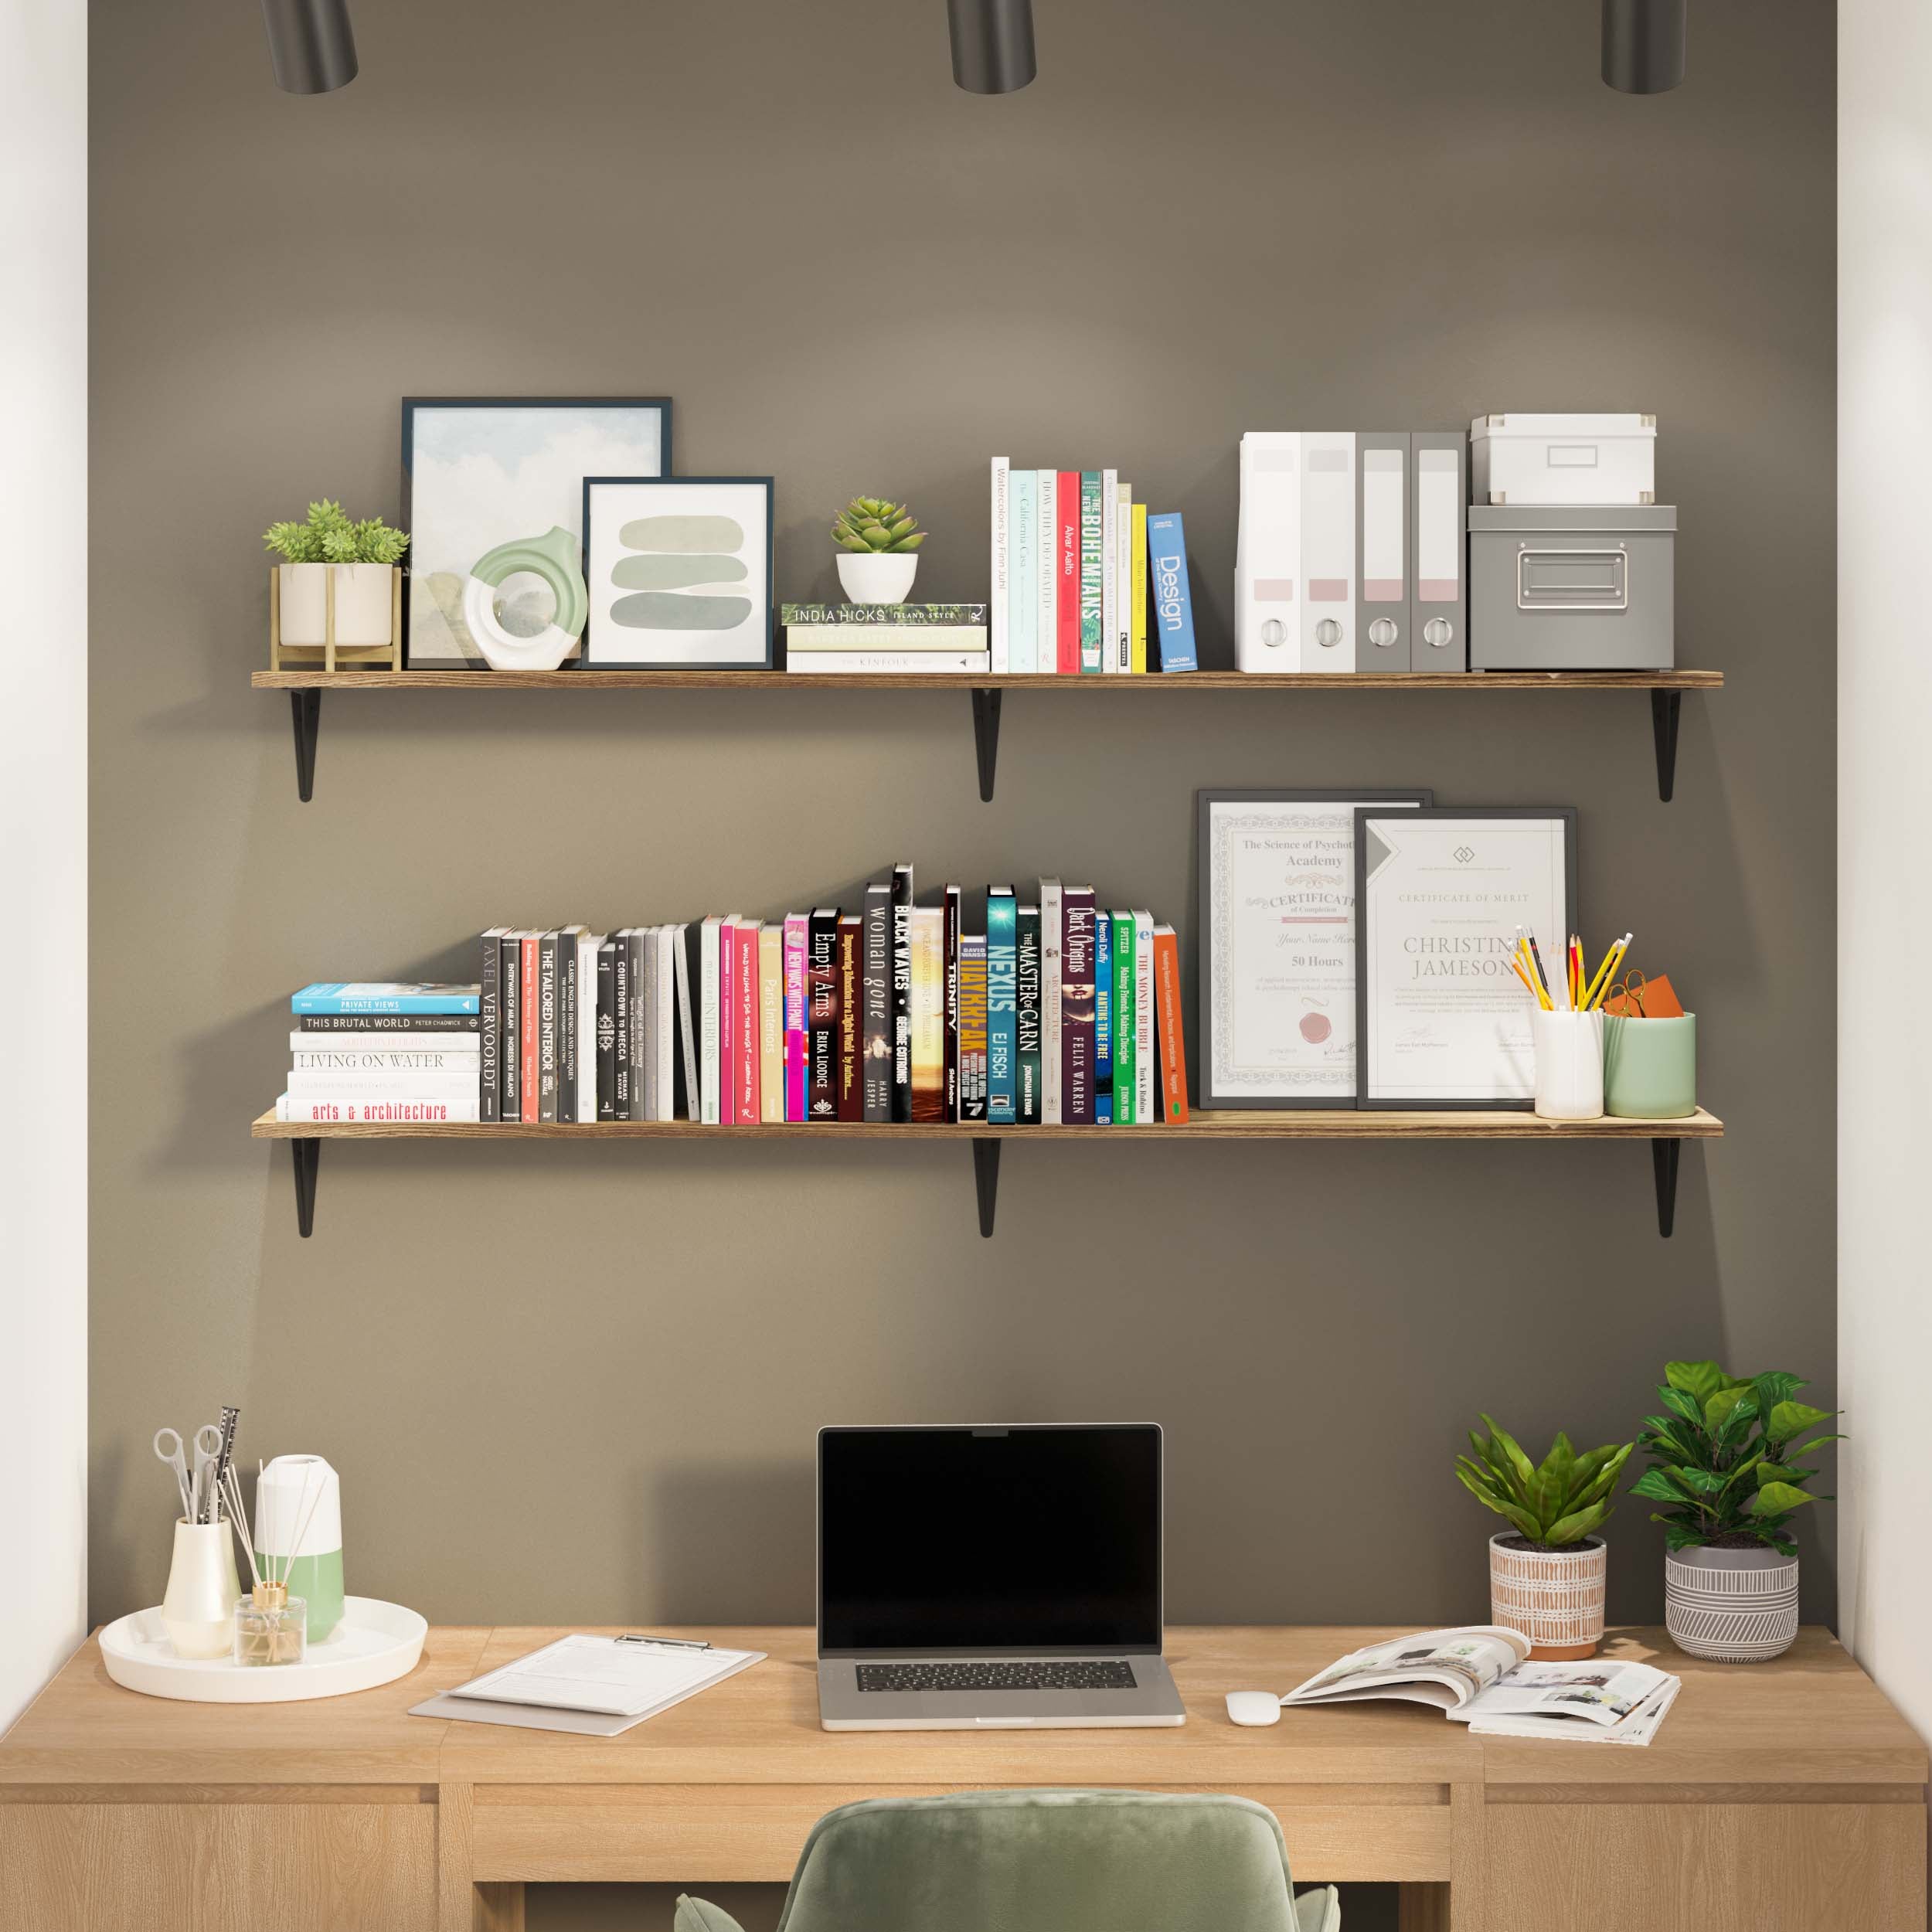 Home office shelves above a desk, neatly organized with books, office supplies, and decorative plants, enhancing productivity.